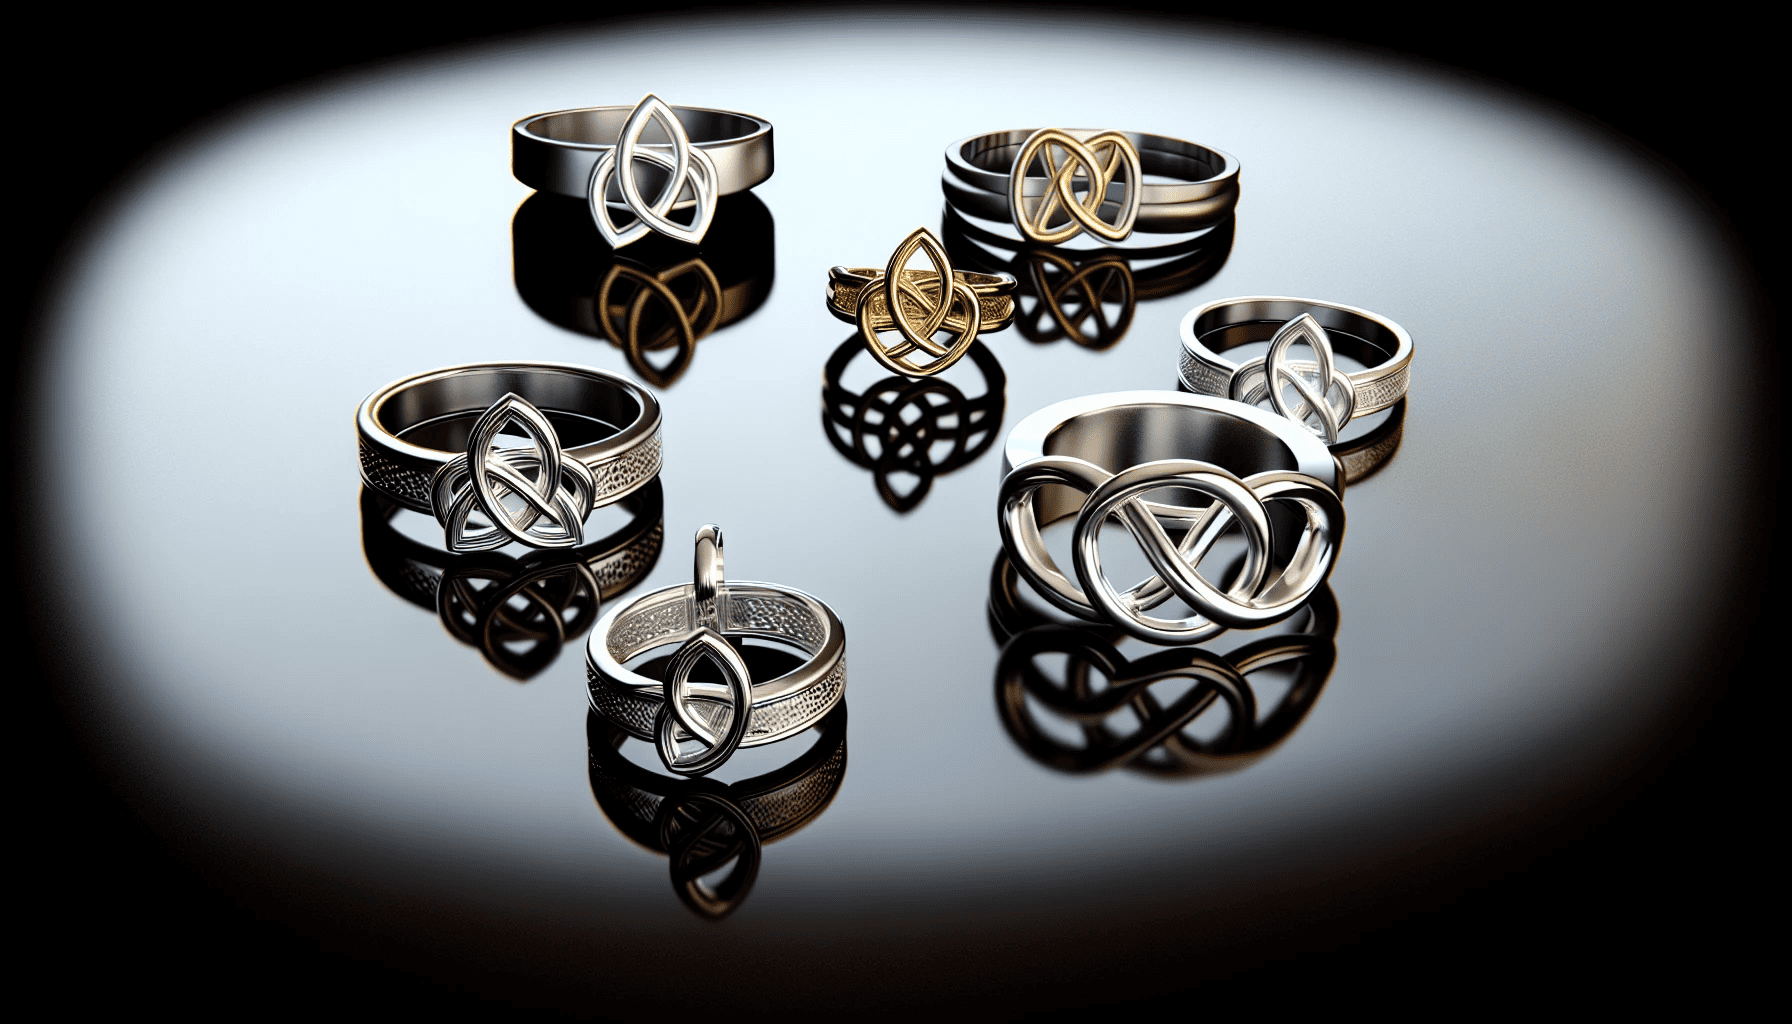 Modern trinity knot jewelry and its cultural relevance